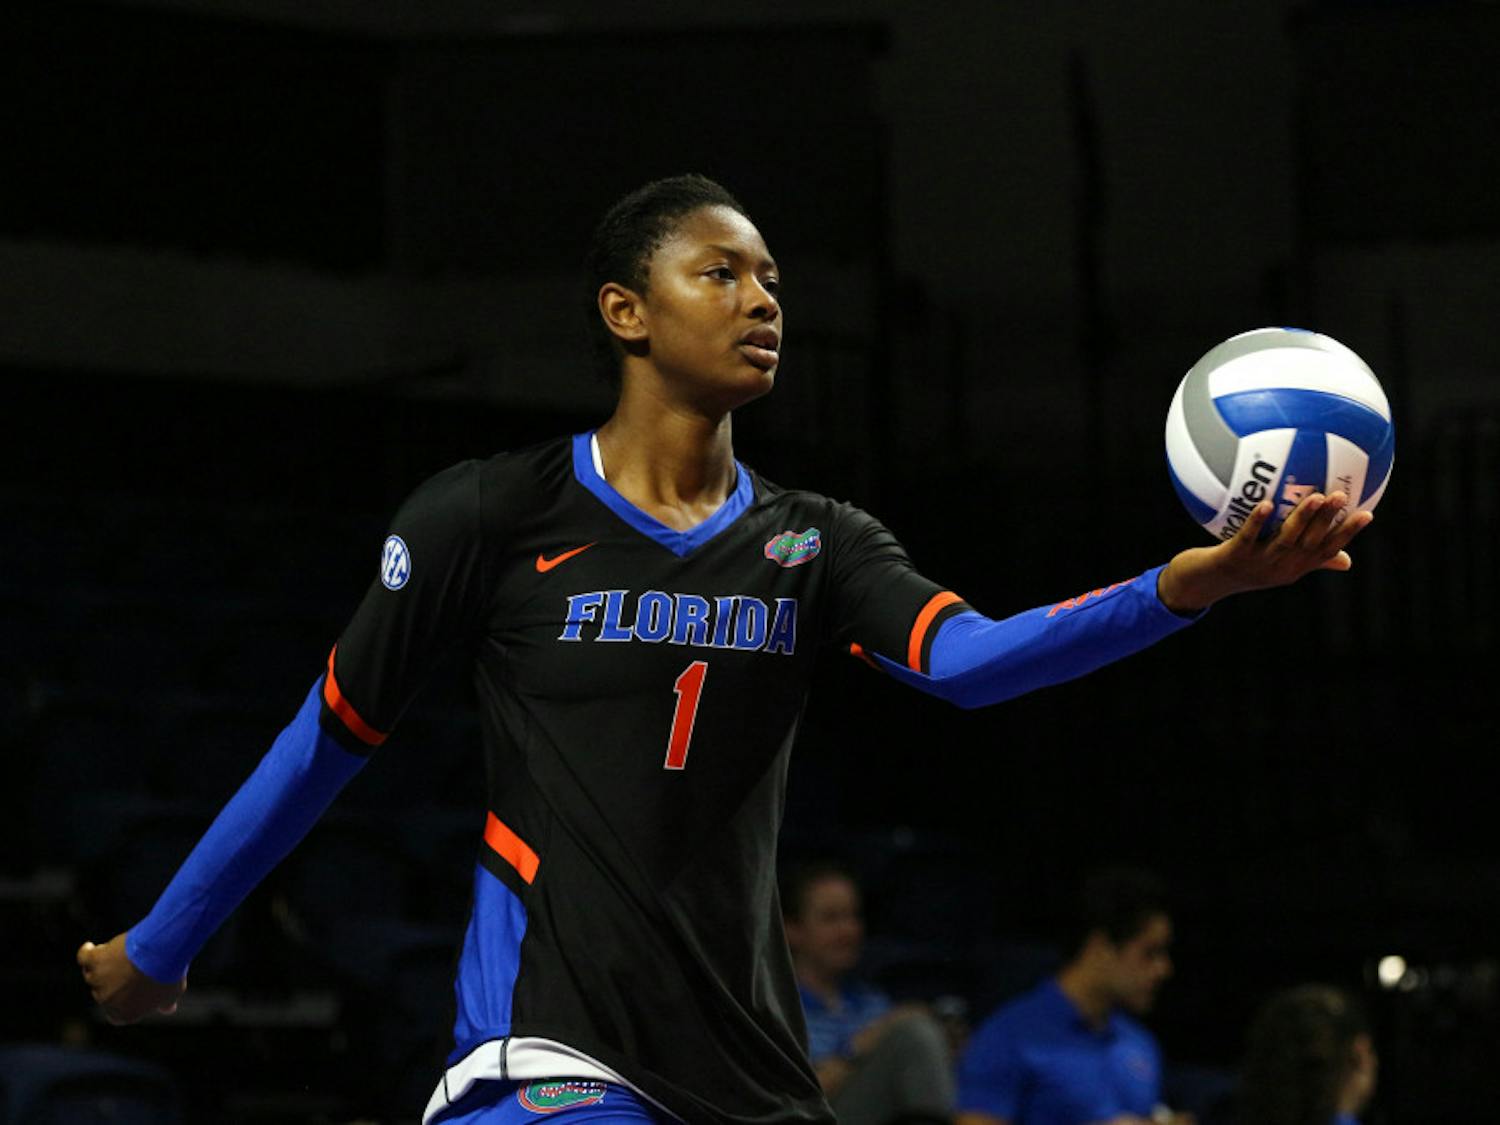 Florida volleyball player Rhamat Alhassan's off-the-court interests have caused her teammates to refer to her as the official "grandma" of the Gators. The 2017 SEC Player of the Year will look to keep UF's season alive Thursday night when it takes on Stanford in the Final Four.